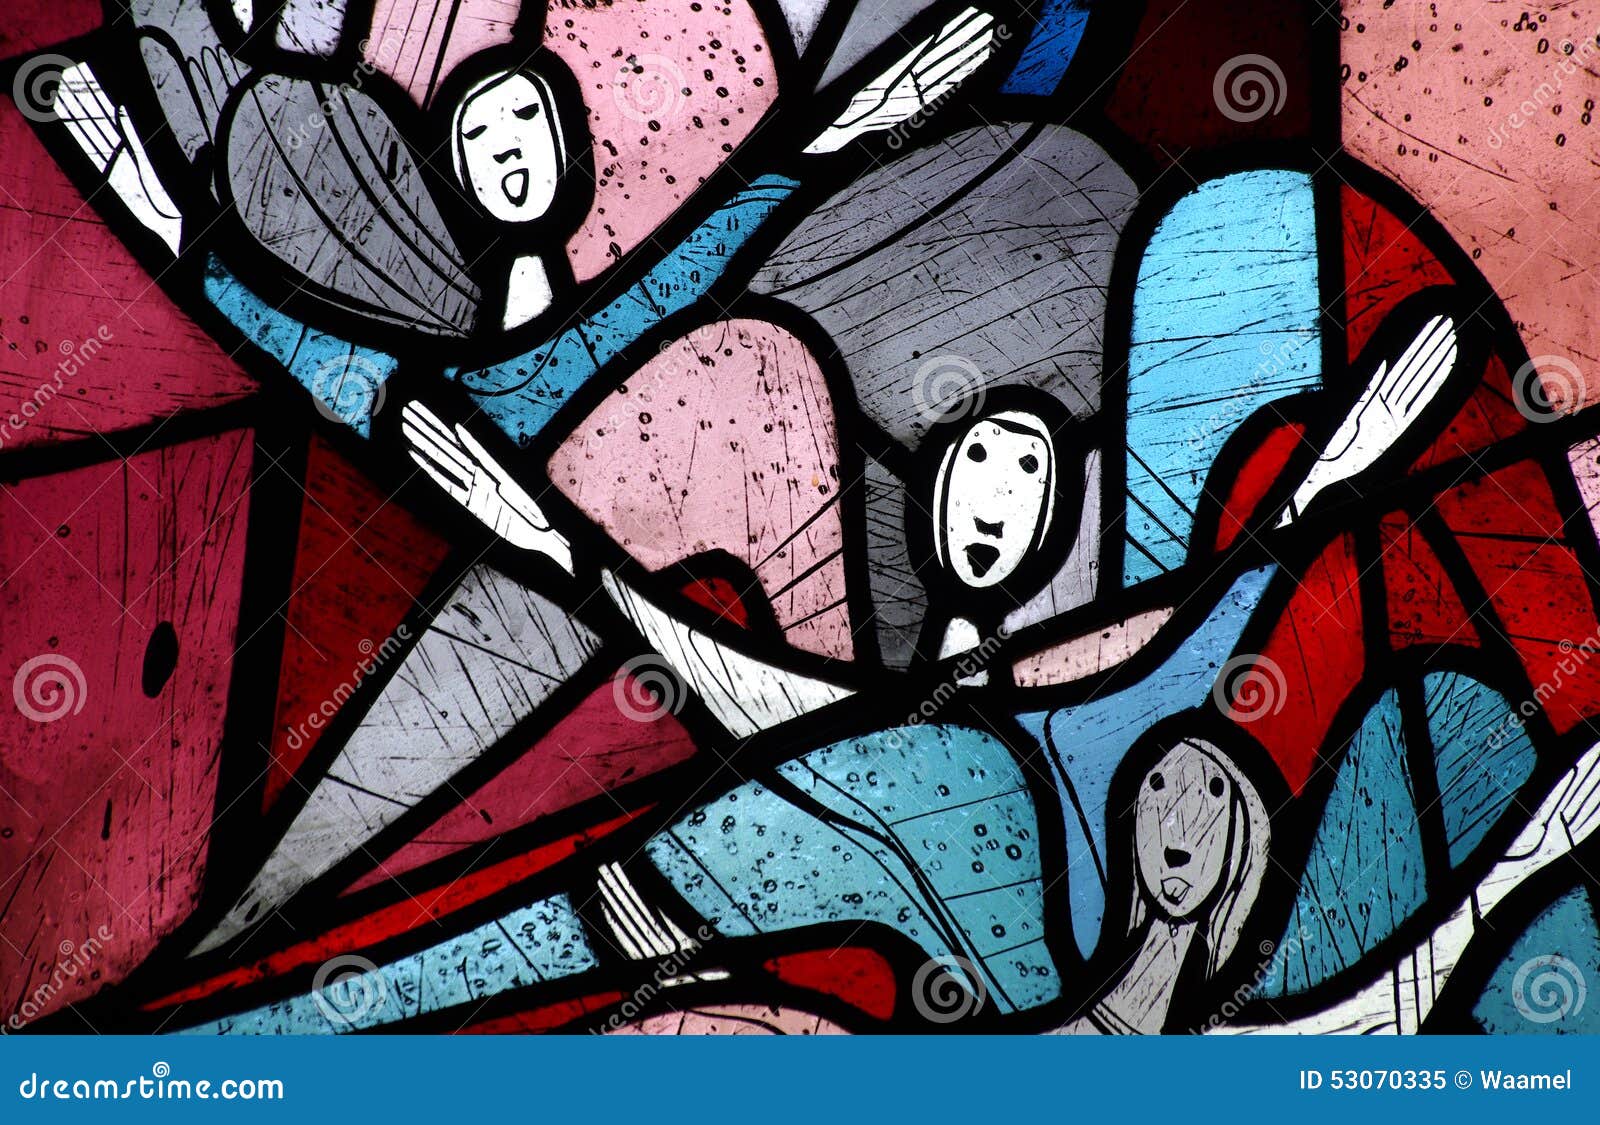 singing angels in stained glass